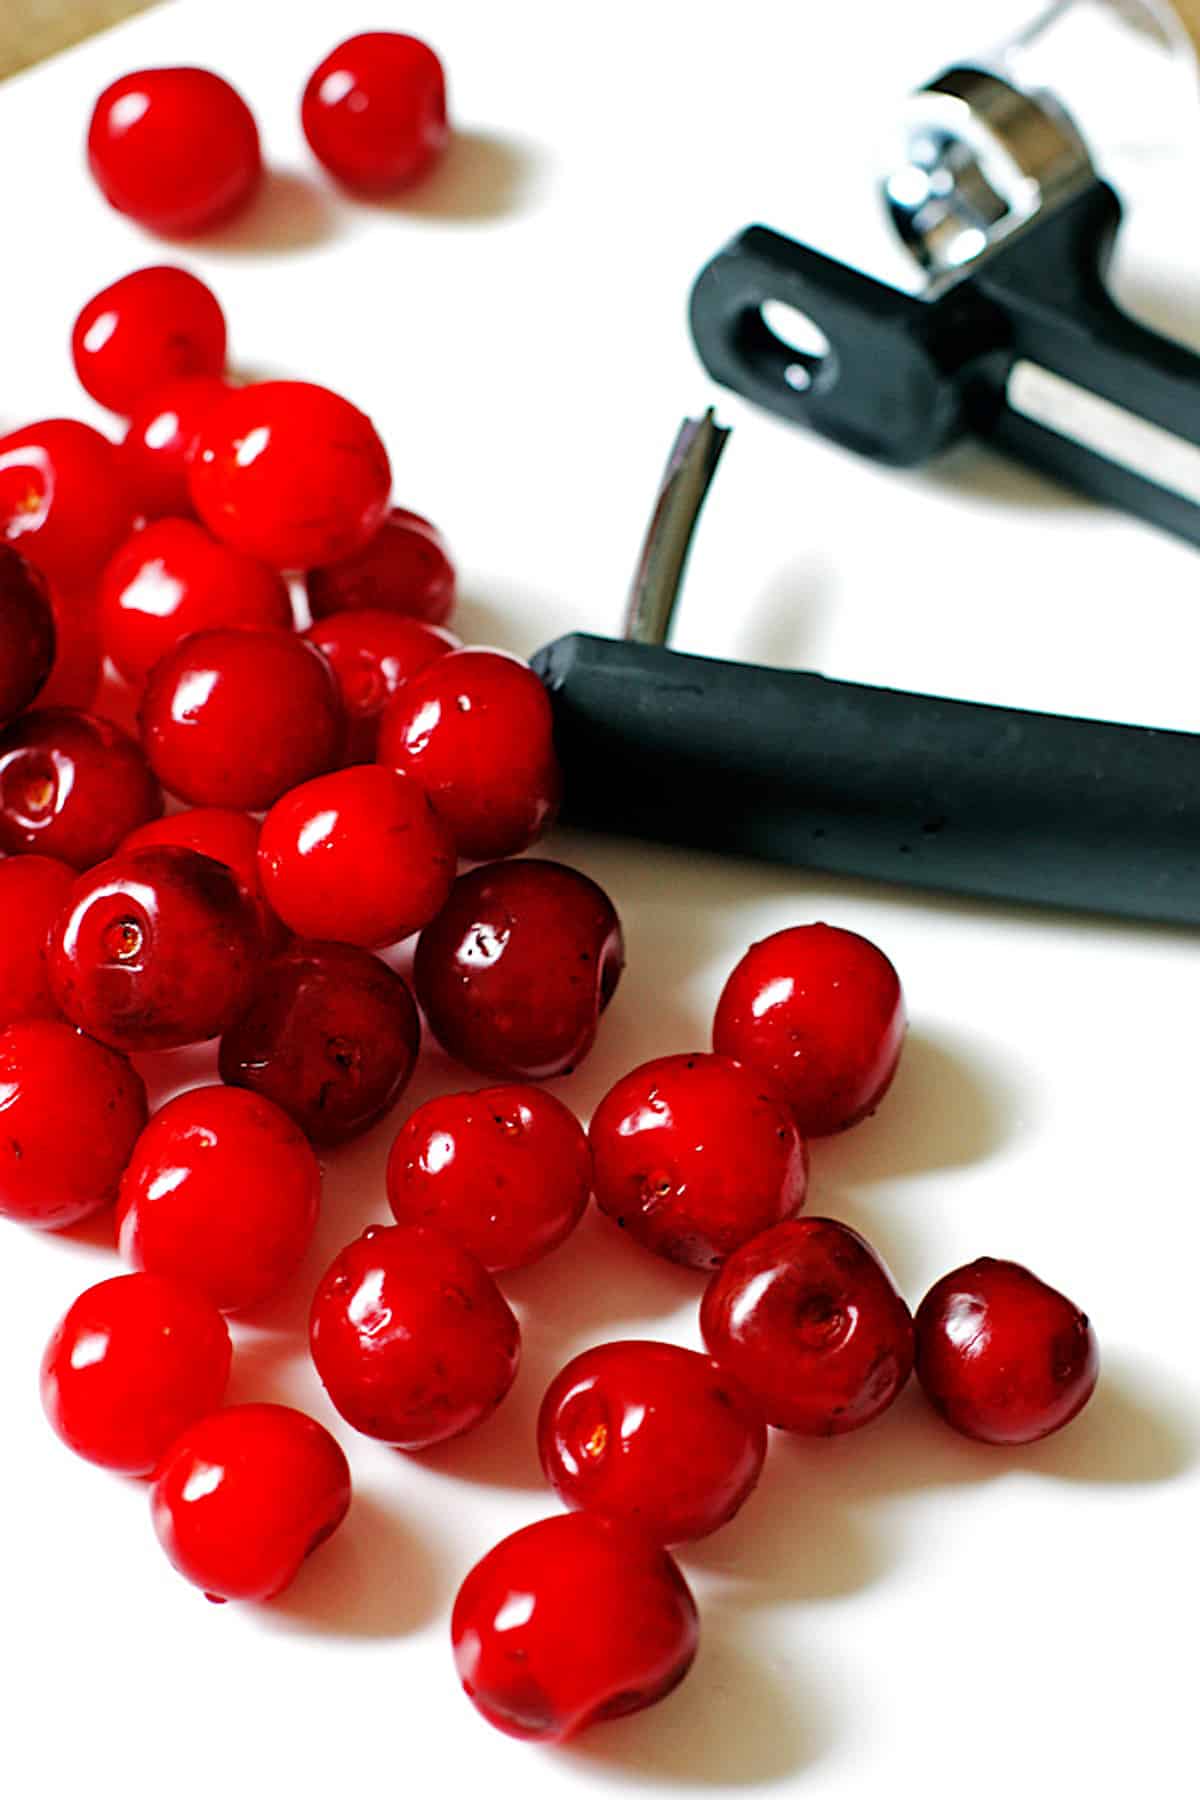 Tart cherries and a cherry pitter on a white counter